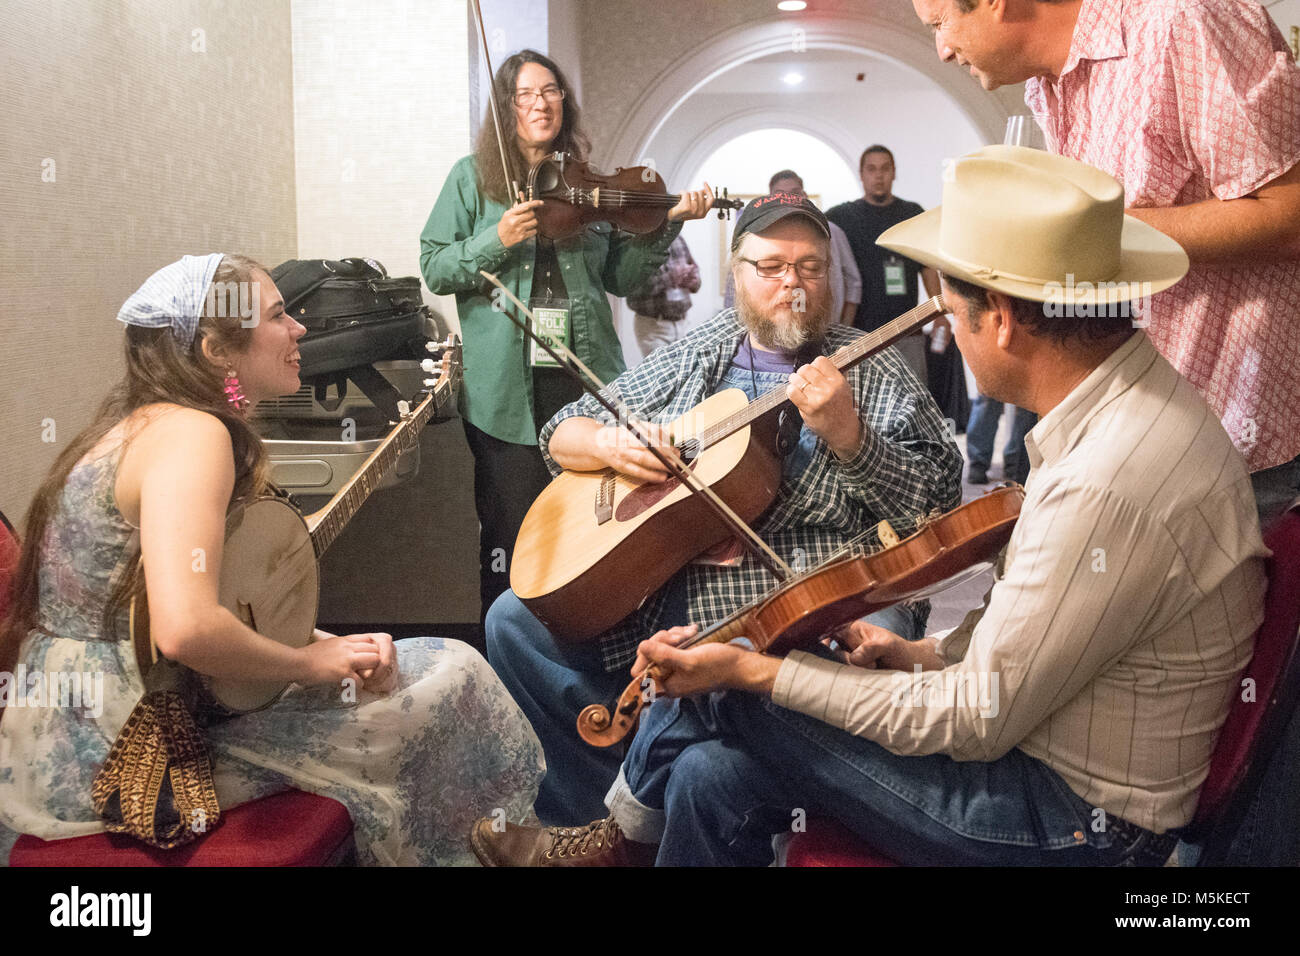 Group of musicians playing stringed instruments together,  Greensboro, North Carolina. Stock Photo